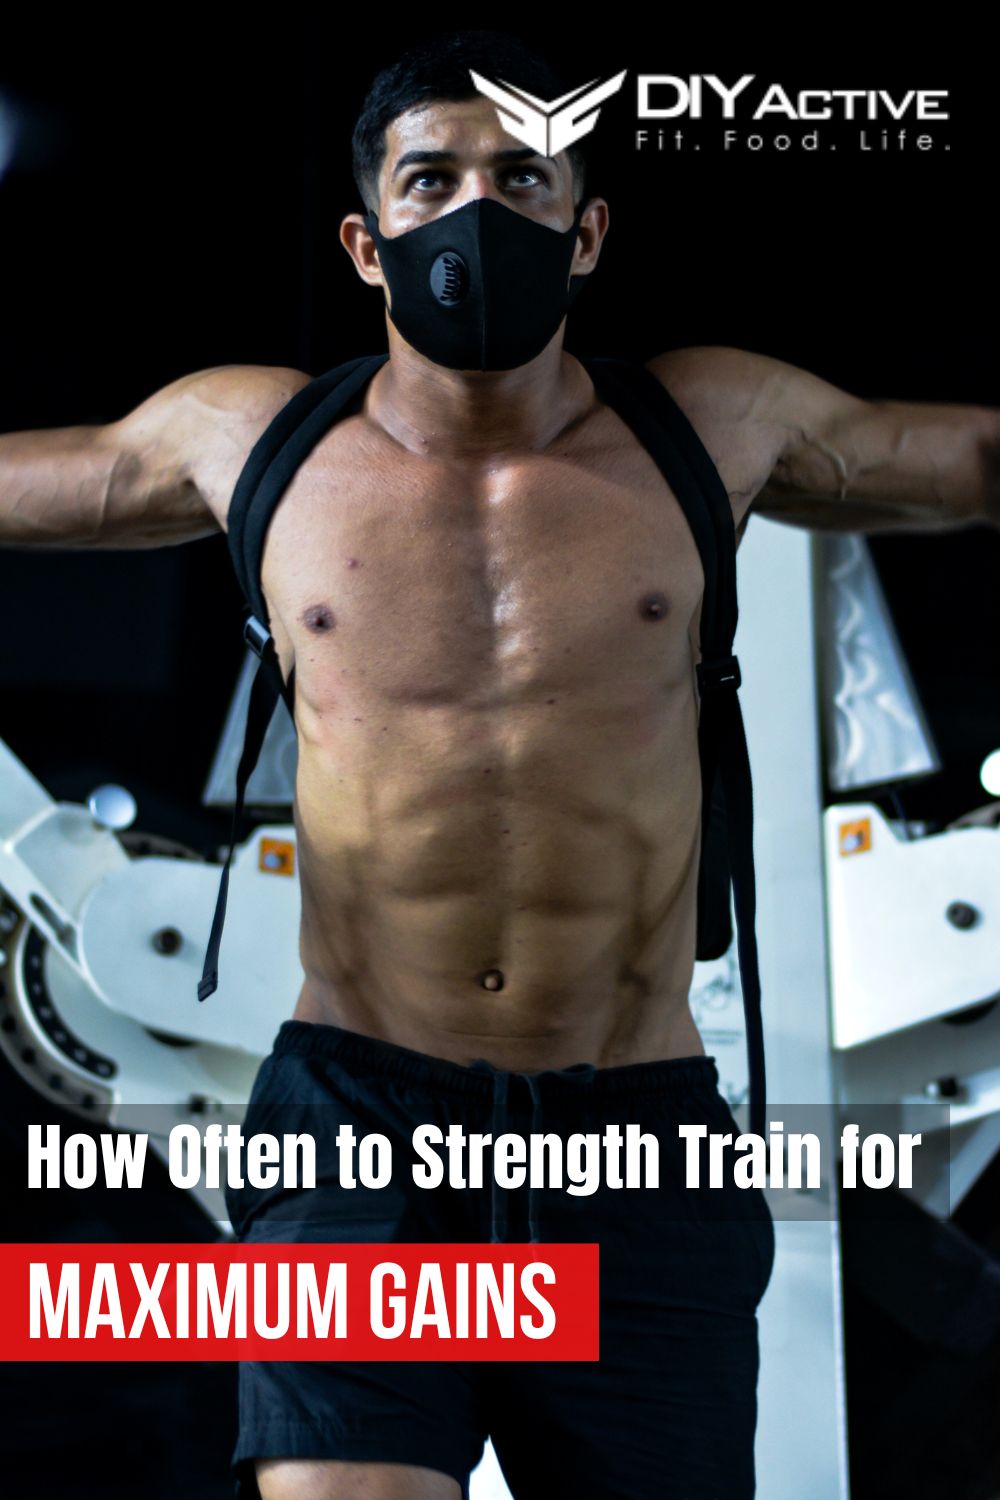 Strength Training Frequency, How Often to Strength Train for Maximum Gains2